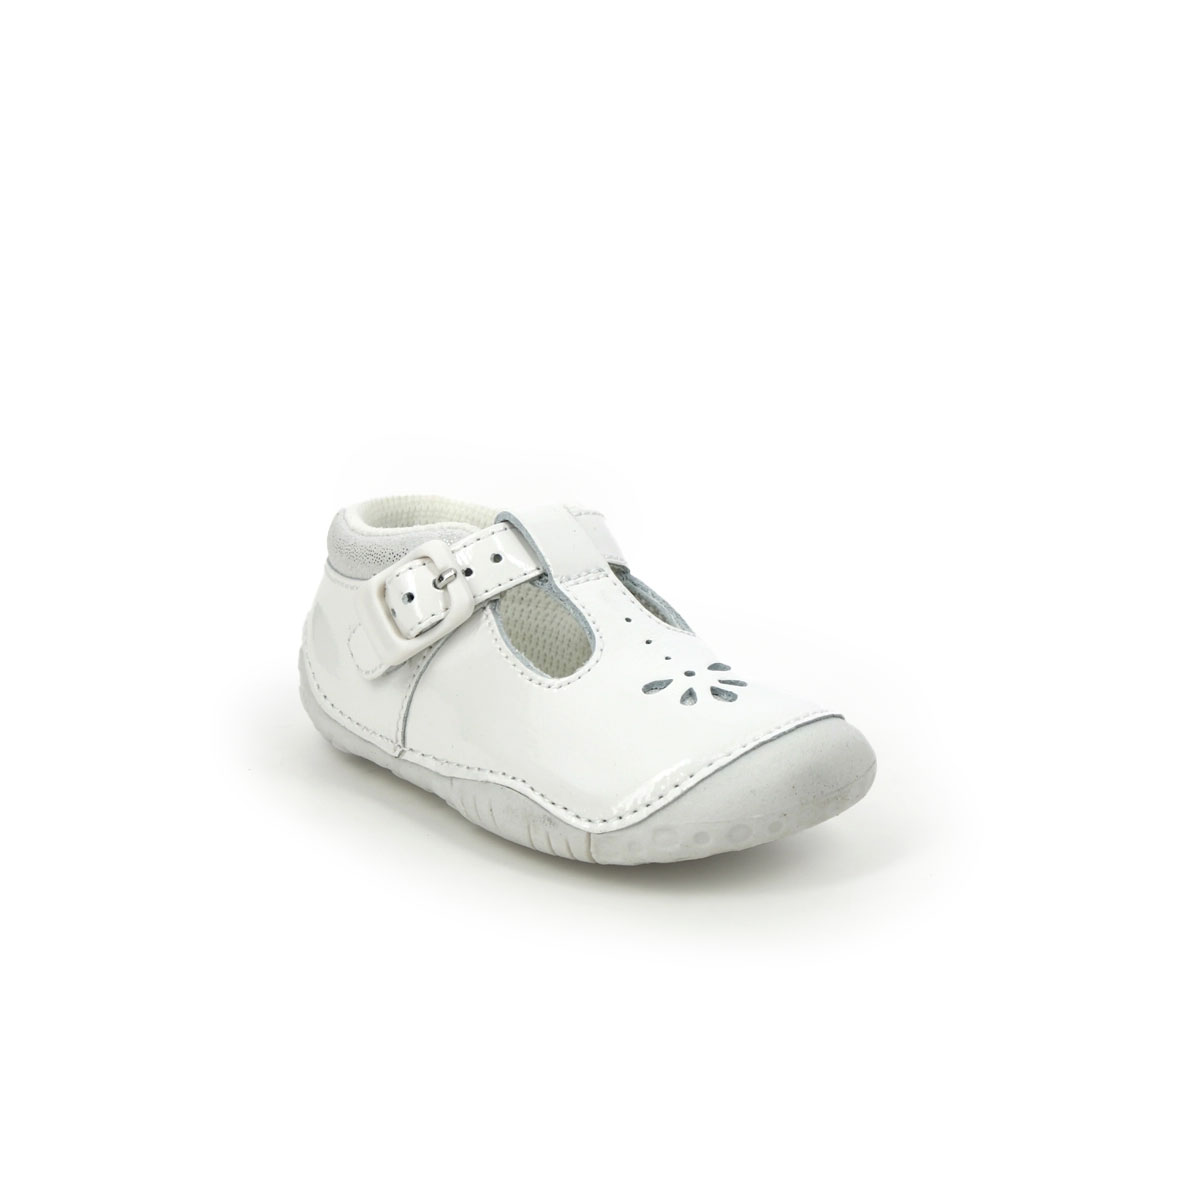 Start Rite - Baby Bubble In White Patent 0773-14F In Size 3 In Plain White Patent First And Baby Shoes  In White Patent For kids